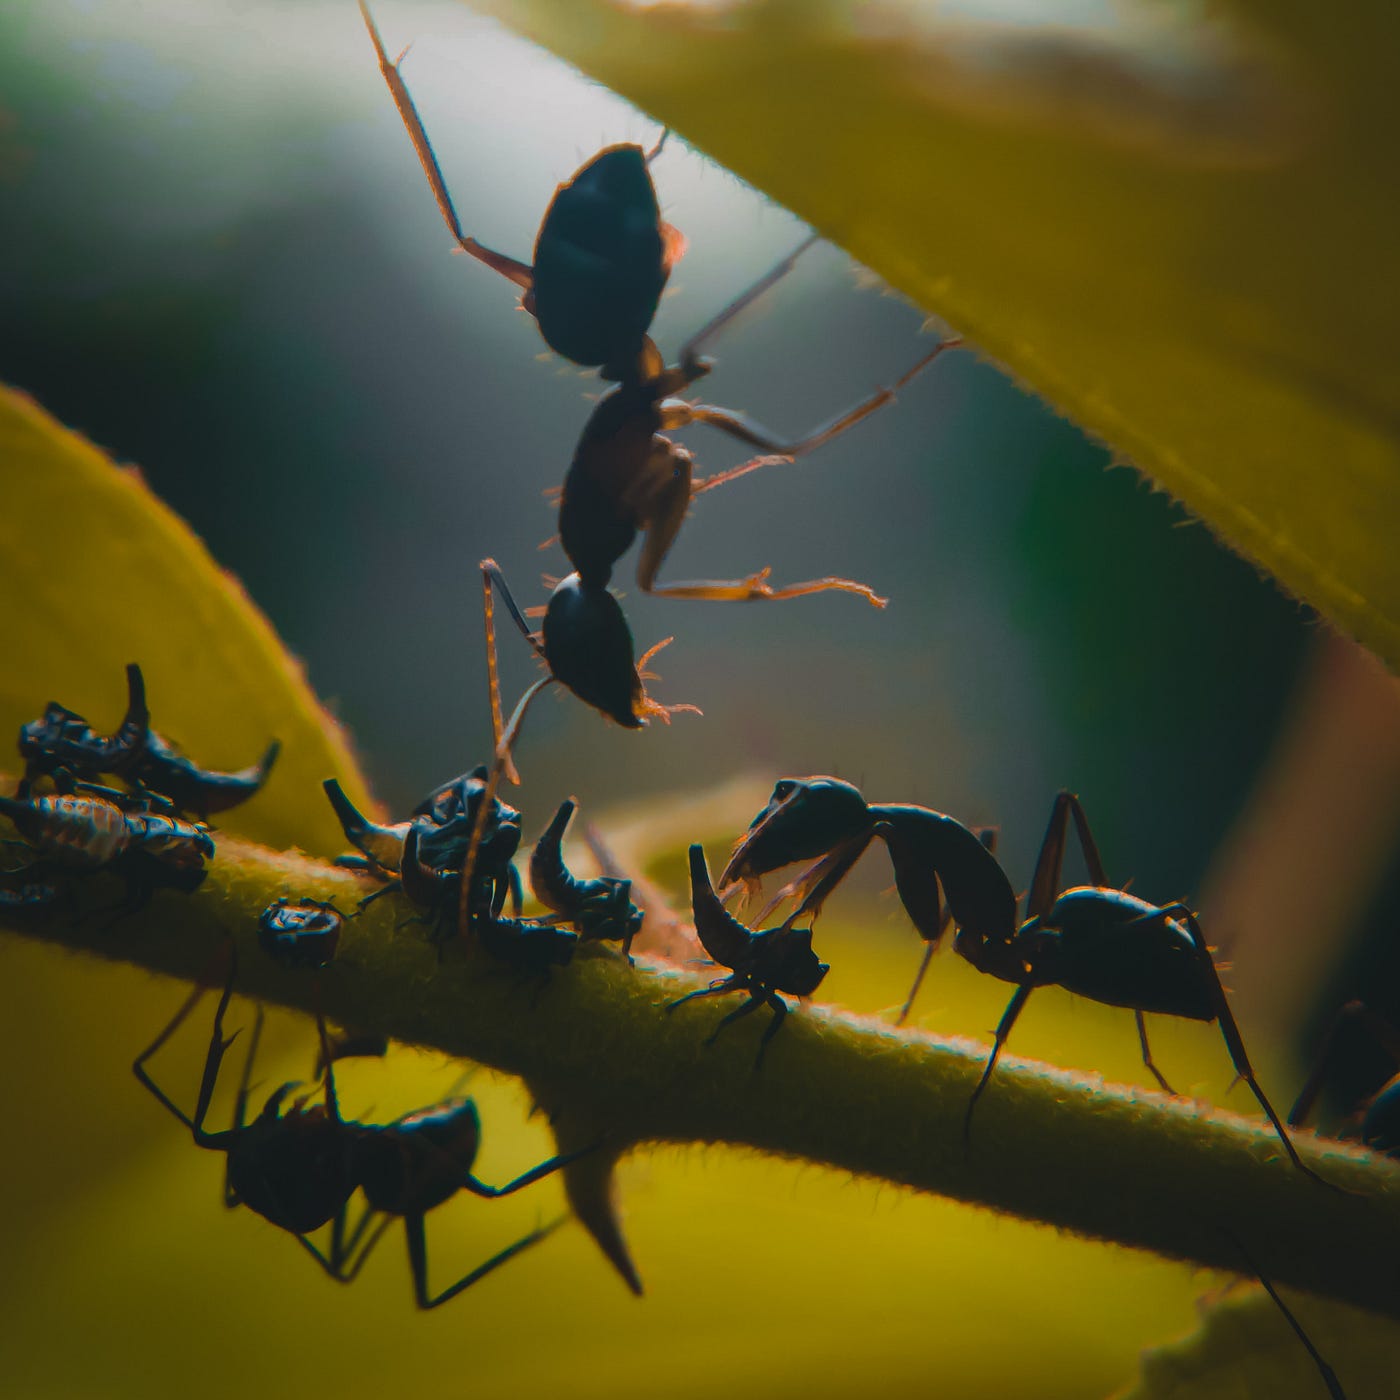 How Giant Ant Heads May Aid Bio-Inspired Designs